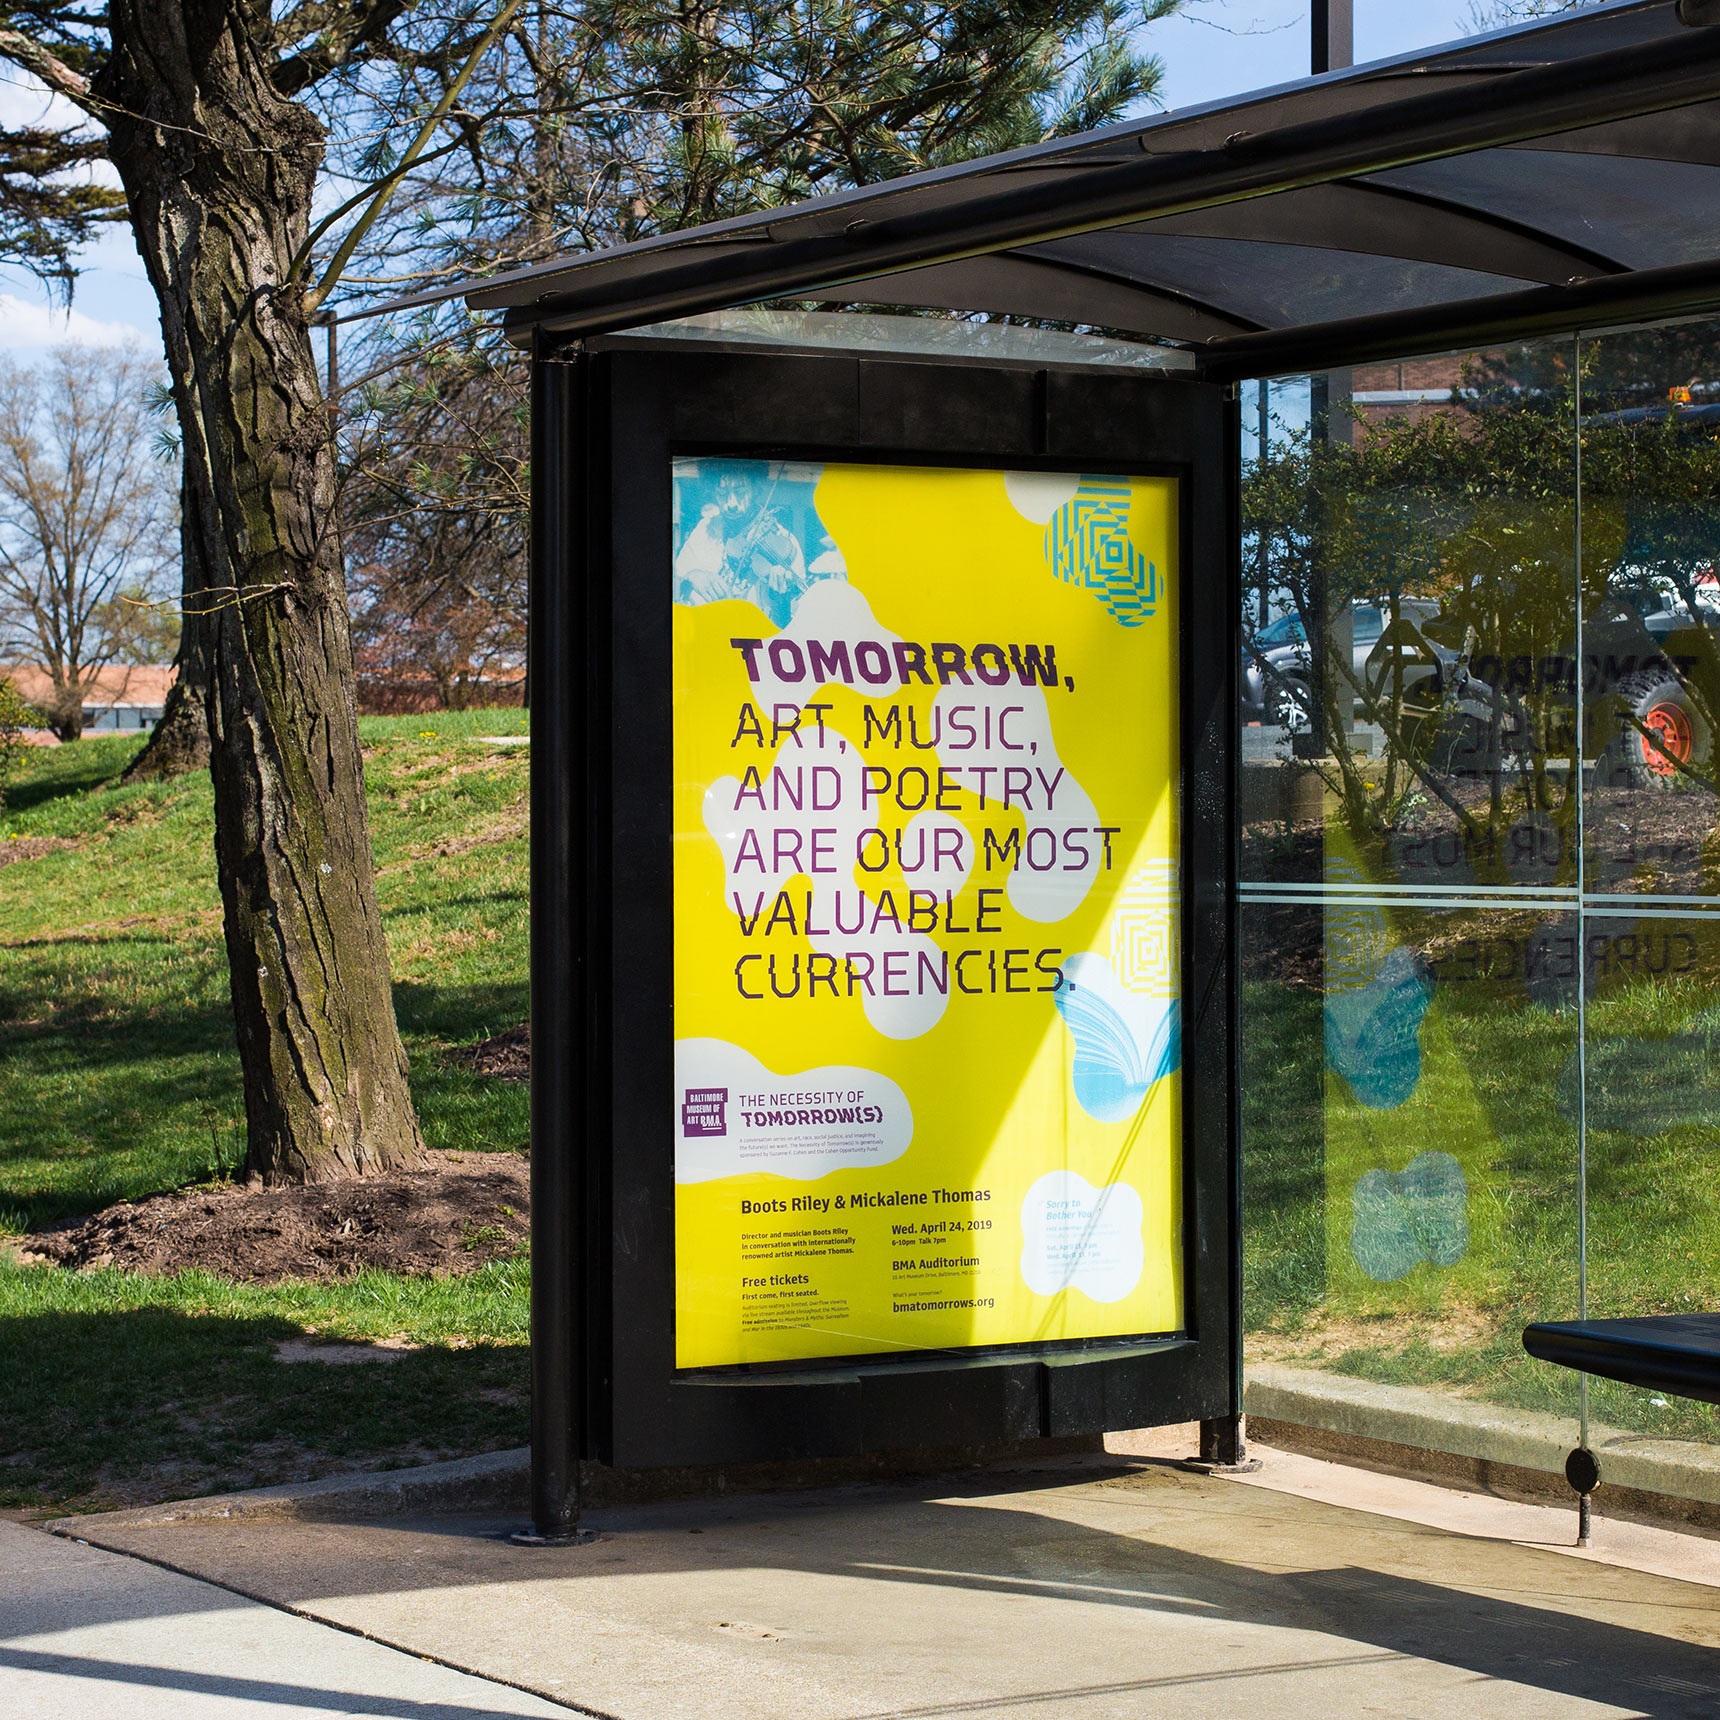 Tomorrow, art, music, and poetry are our most valuable currencies: a transit ad for Baltimore Museum of Art's Necessity of Tomorrow Lecture series